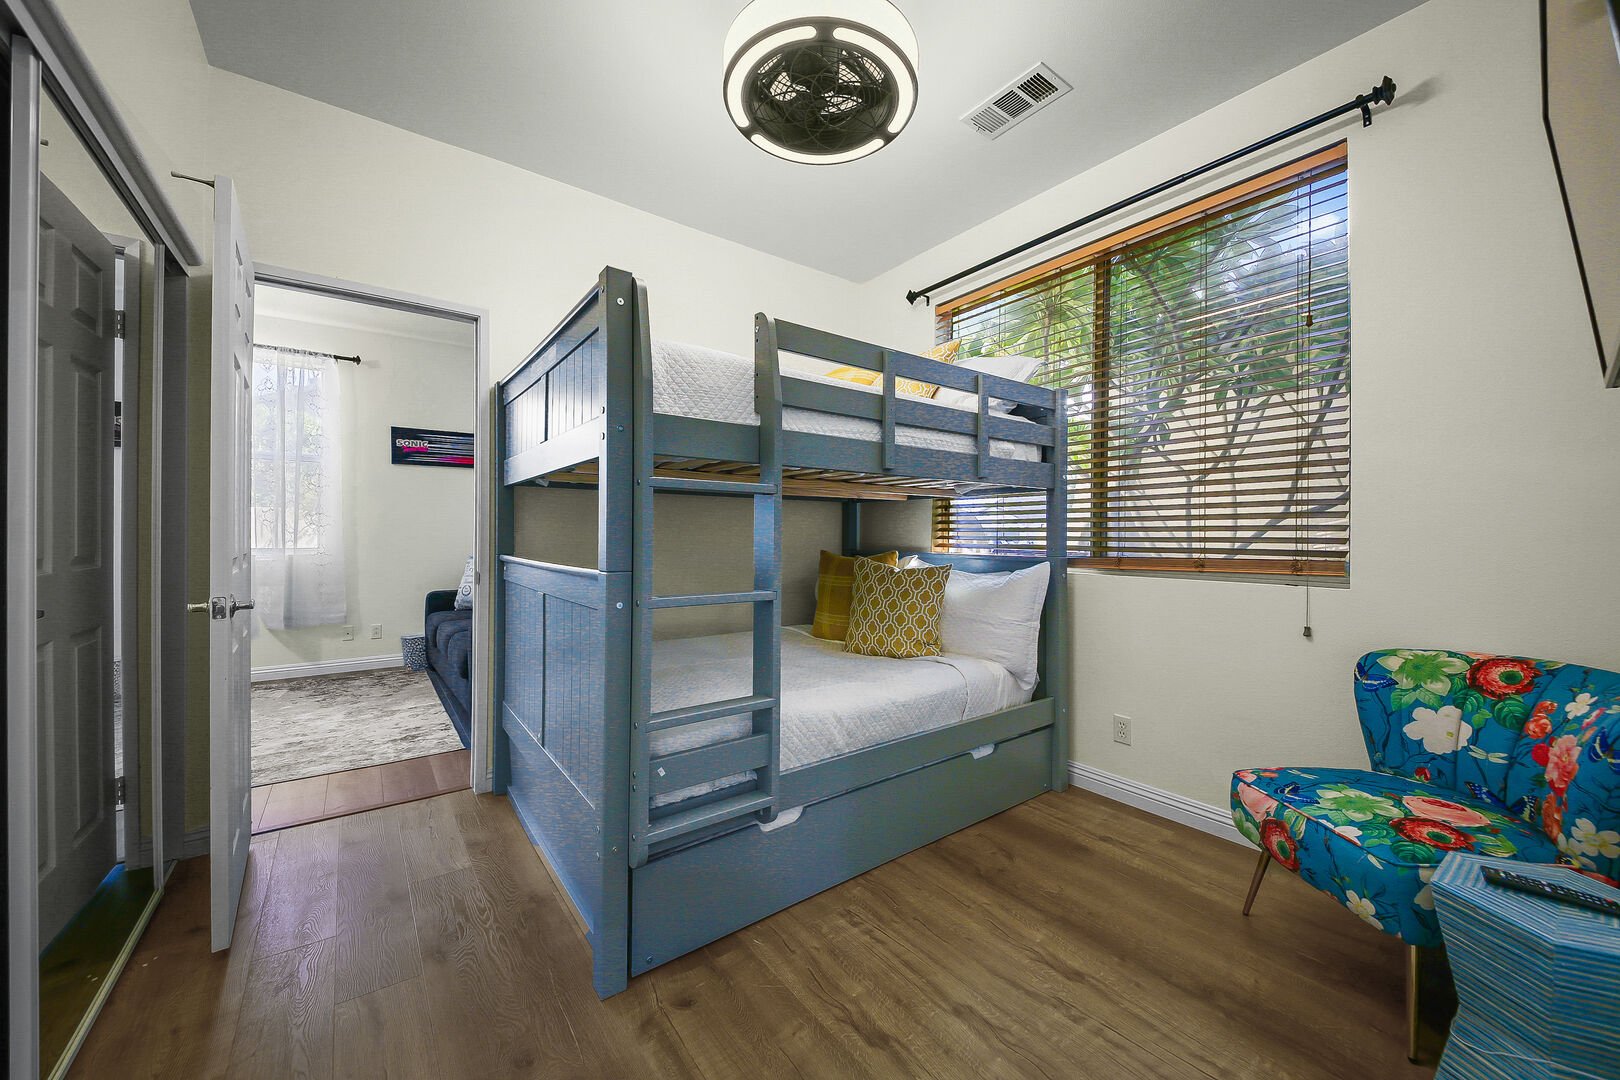 Bedroom 4 features a Full Over Full with Twin Trundle Bunk Bed, 44-inch LG Smart television, remote-controlled ceiling fan, and reach-in closet.